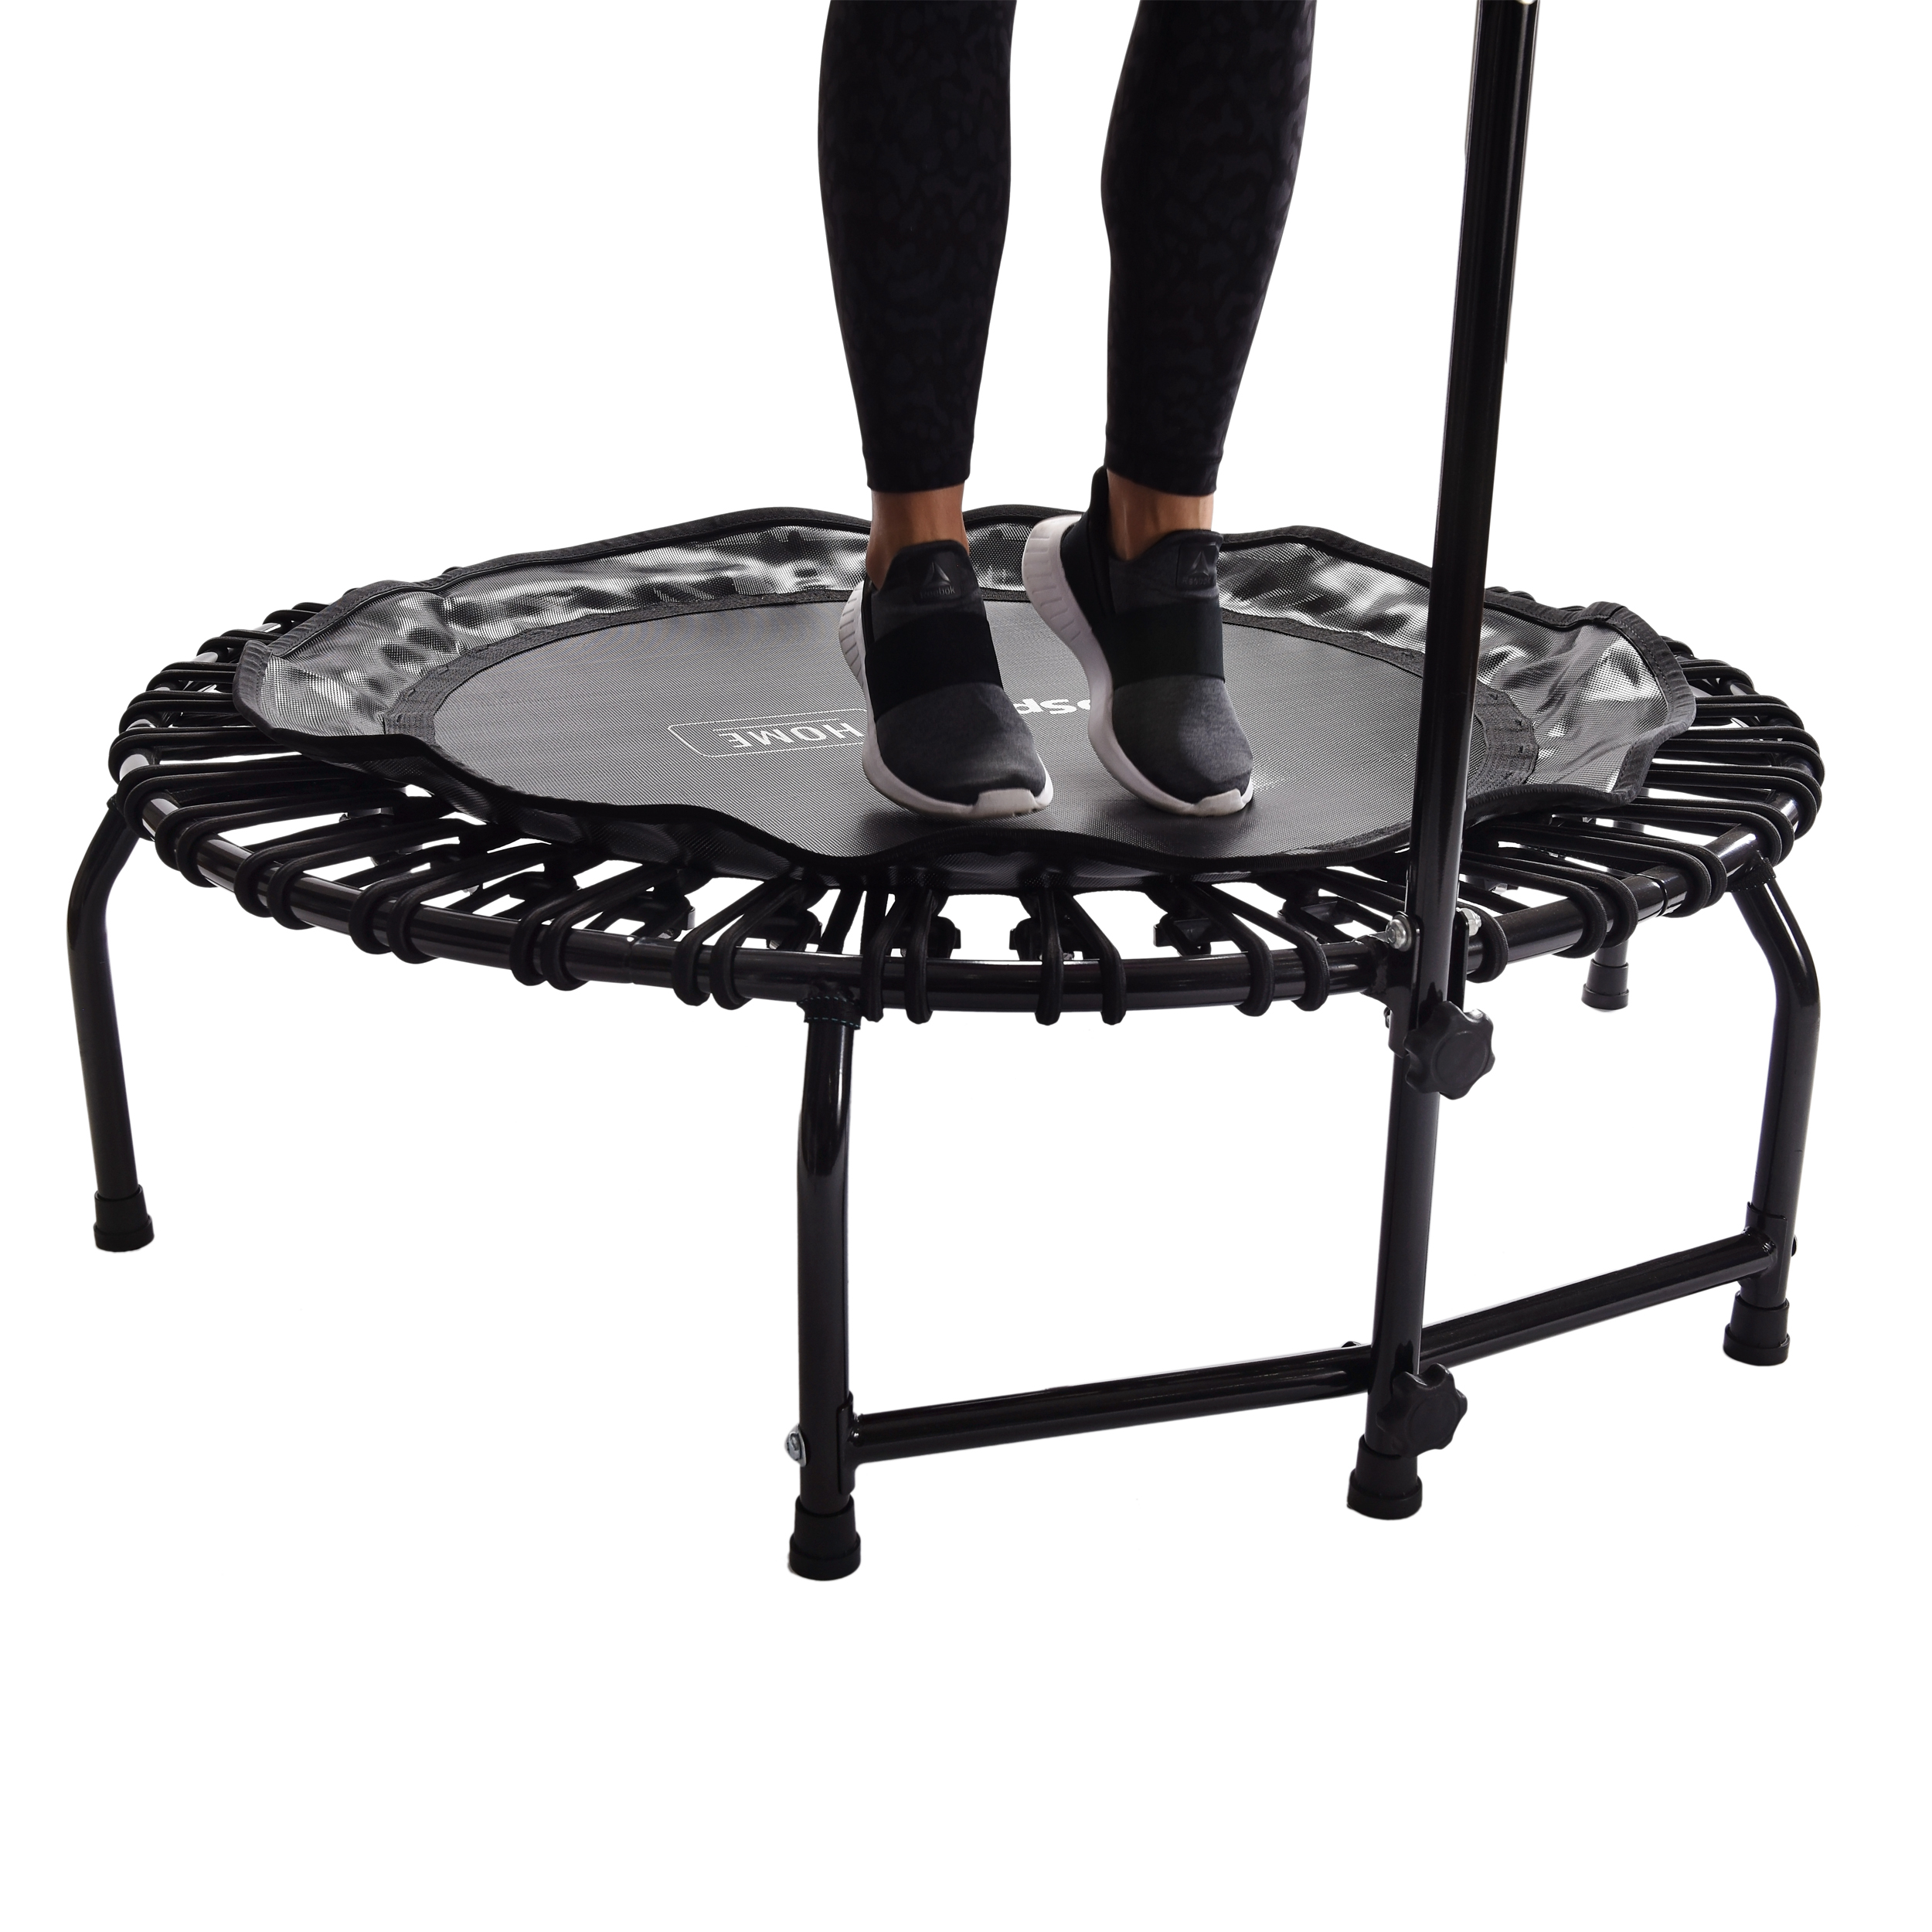 JumpSport 250 Durable 35.5 Cardio Workout Home Fitness Trampoline, Pearl  White, 1 Piece - City Market